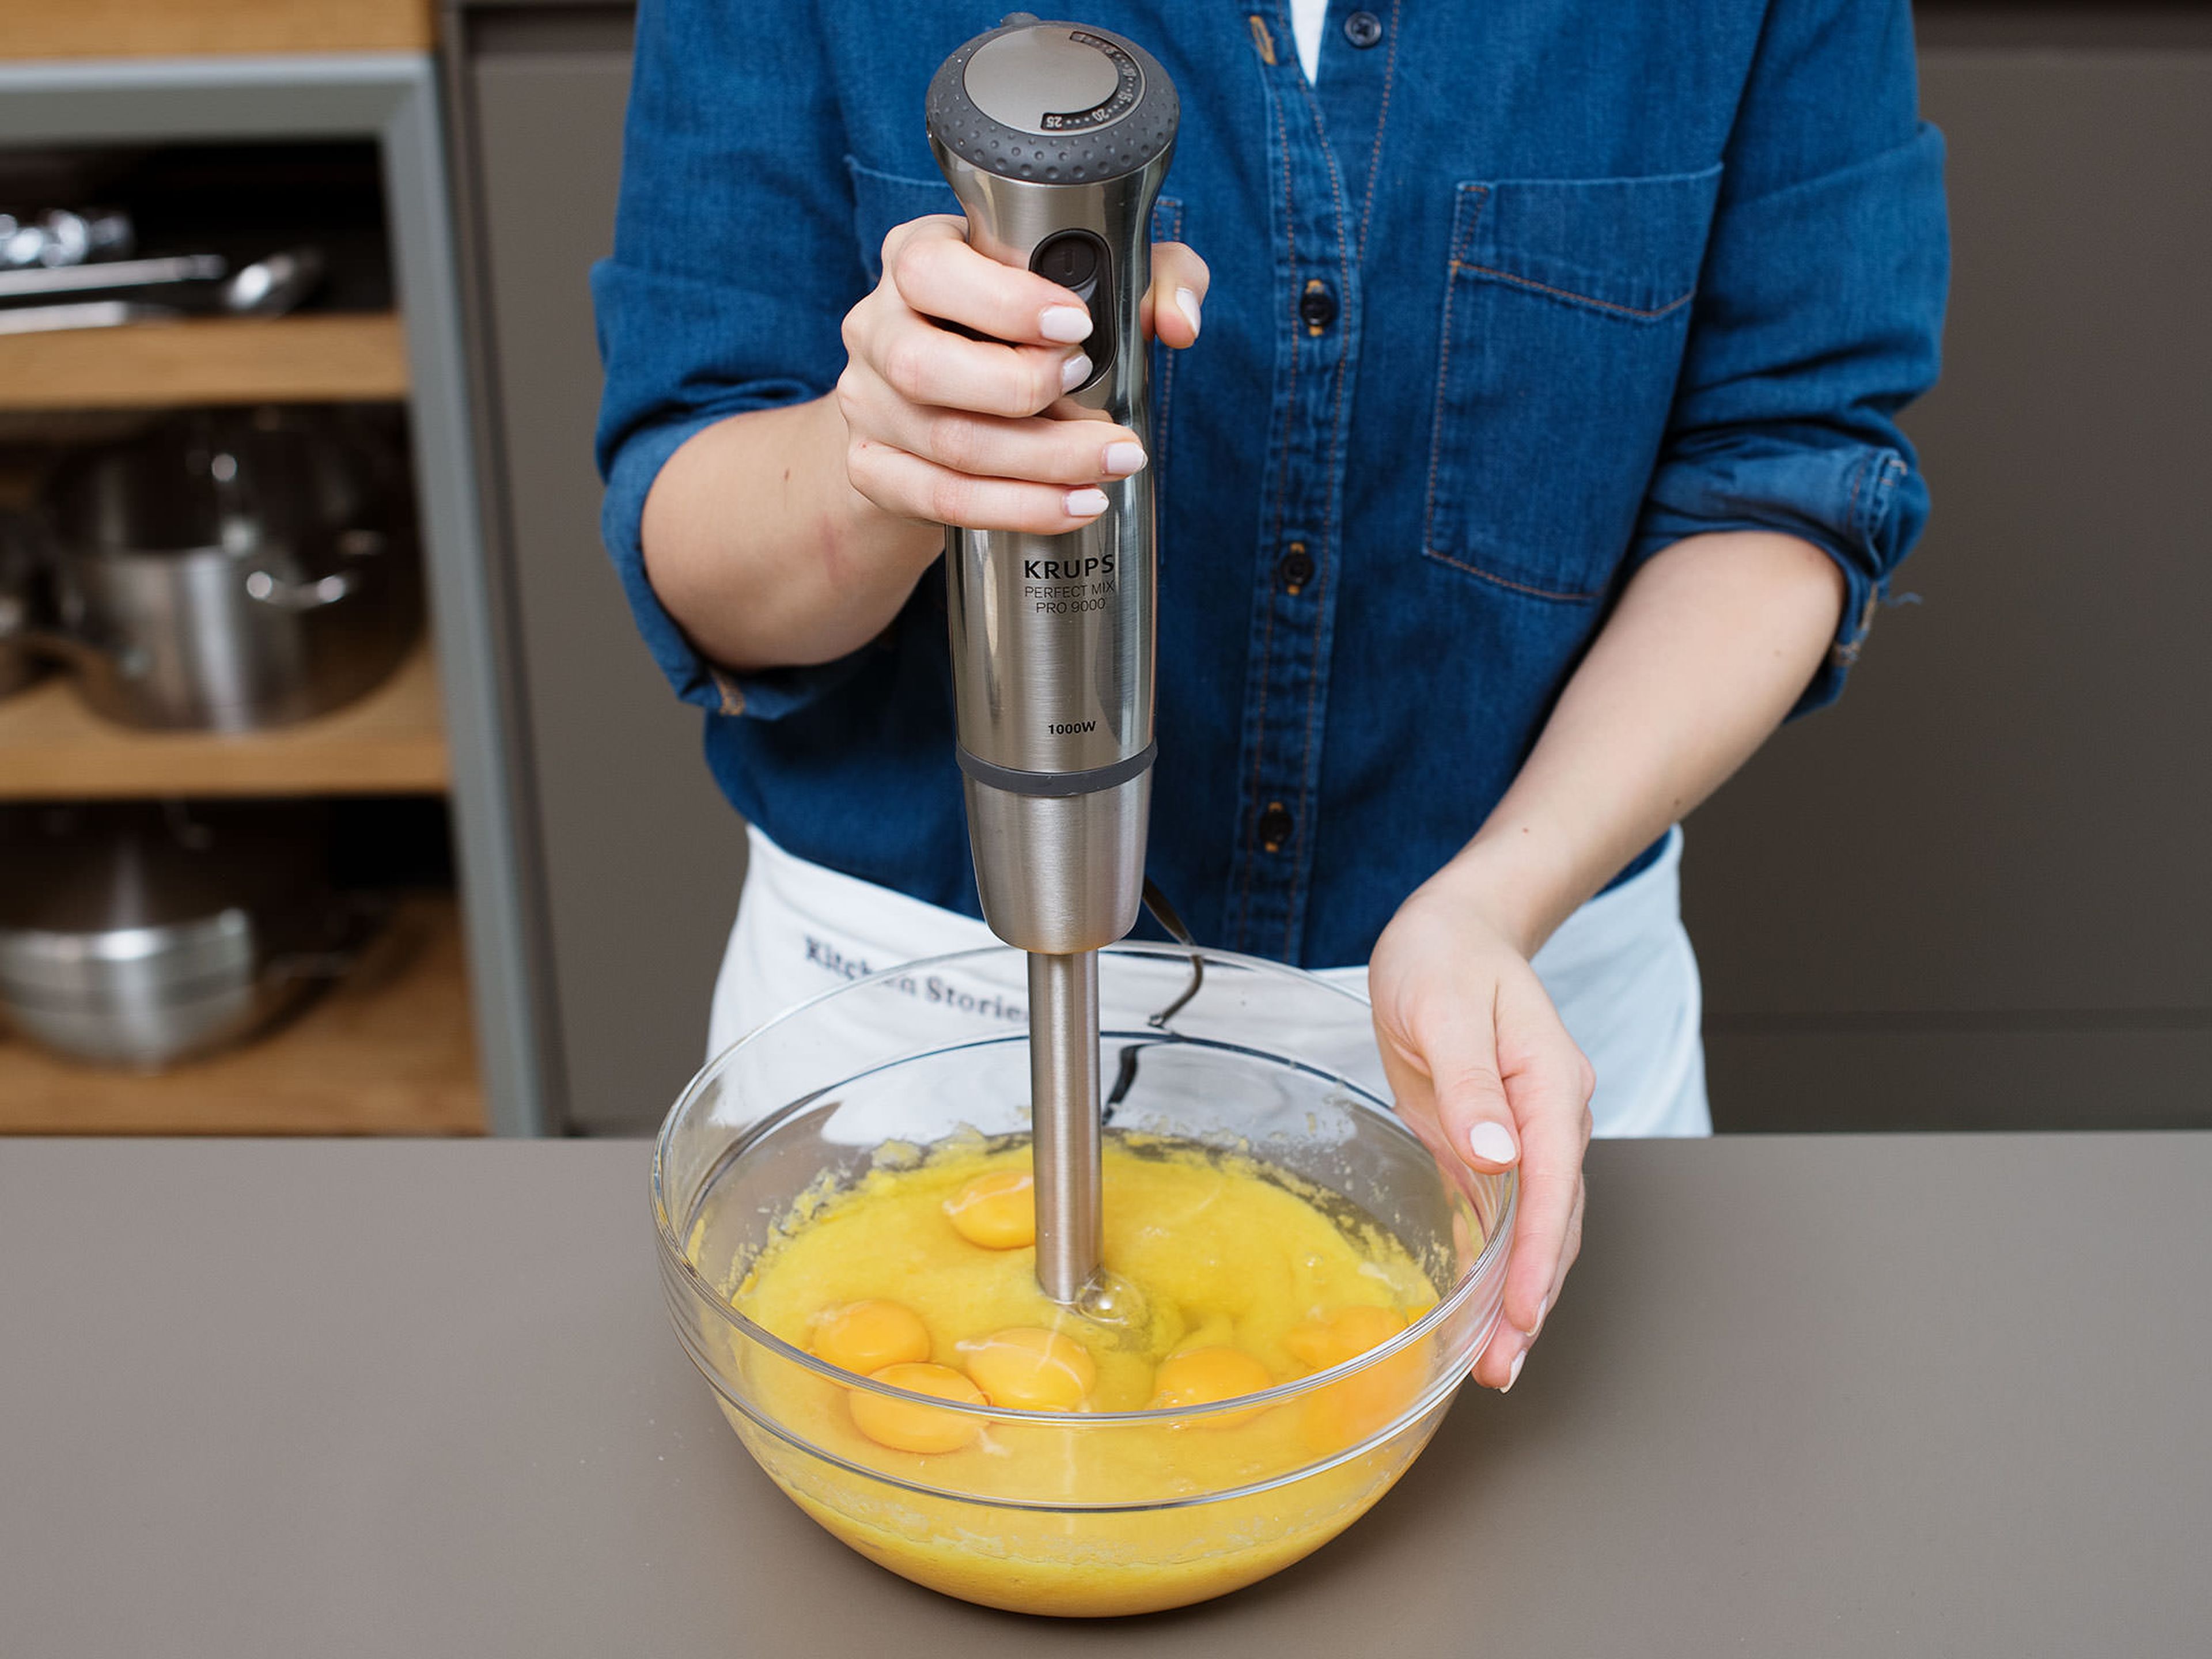 Pre-heat oven to 170°C/340°F. Quarter oranges and remove seeds. Blend oranges with a hand blender in a large bowl, including skins. Add eggs and blend until smooth. In a separate large bowl, mix together ground almonds, sugar, baking soda, and baking powder. Add to wet ingredients and blend until batter is smooth.